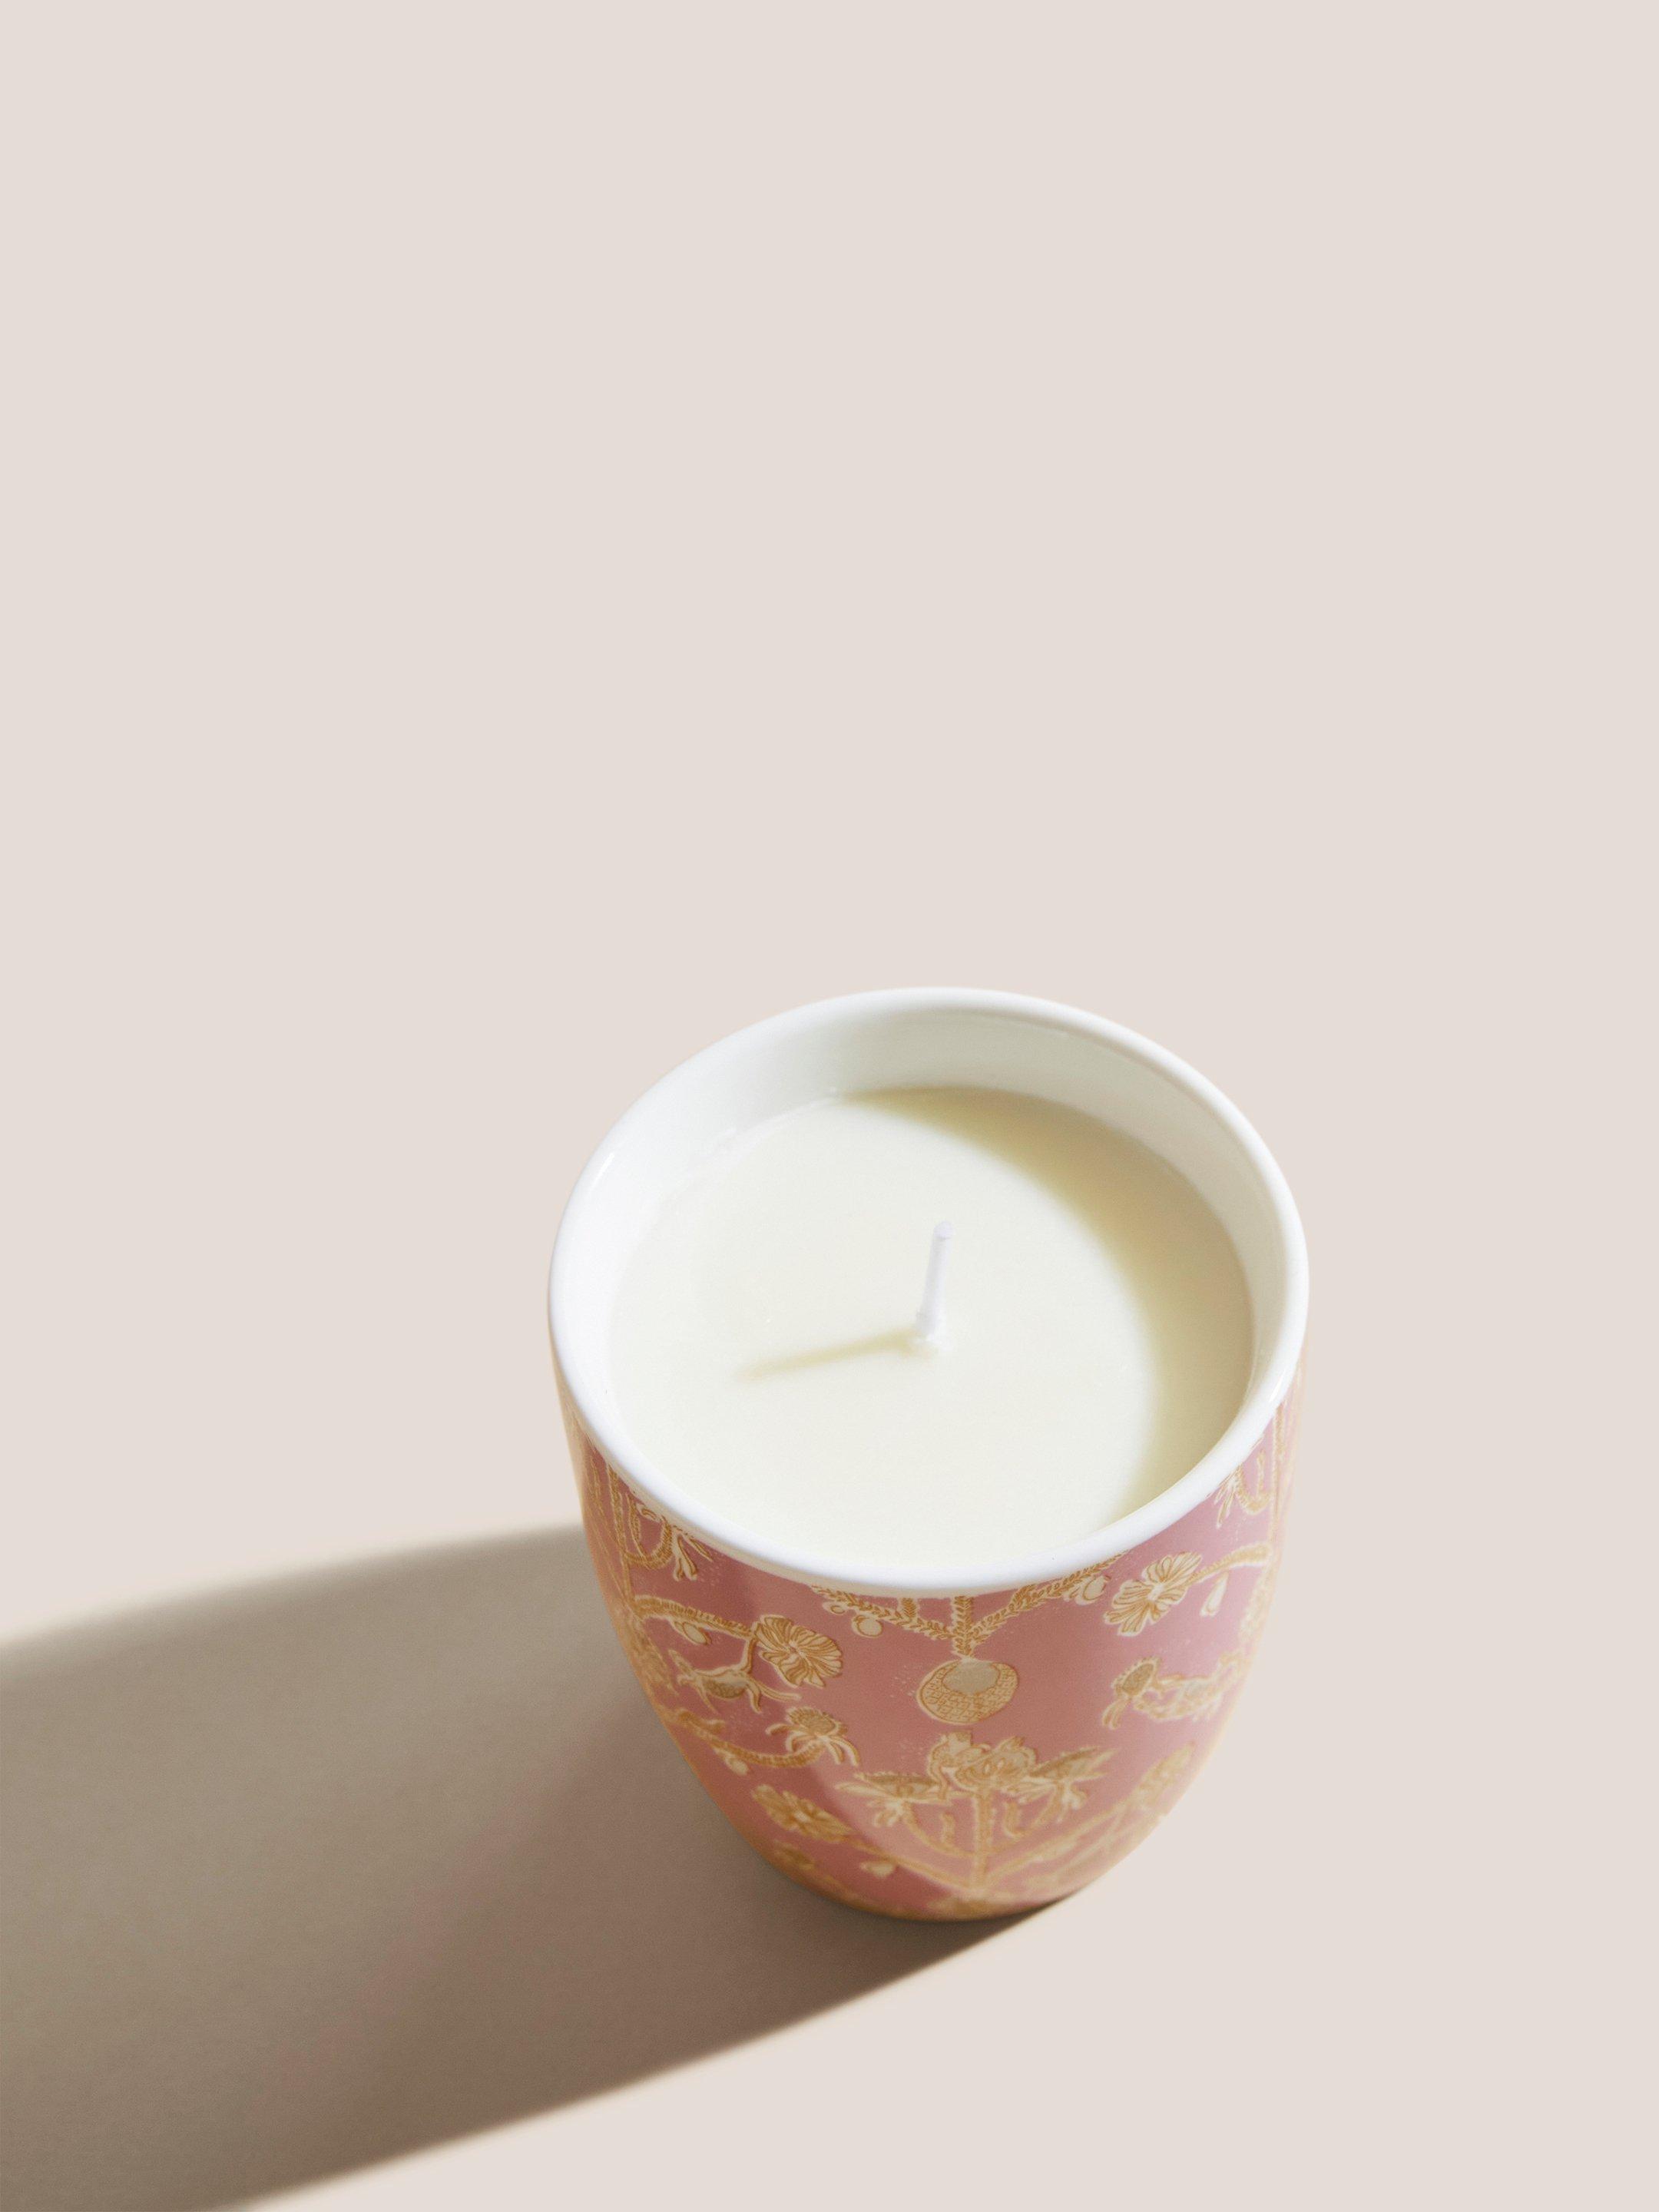 Candelabra Print Candle in PINK MLT - FLAT DETAIL